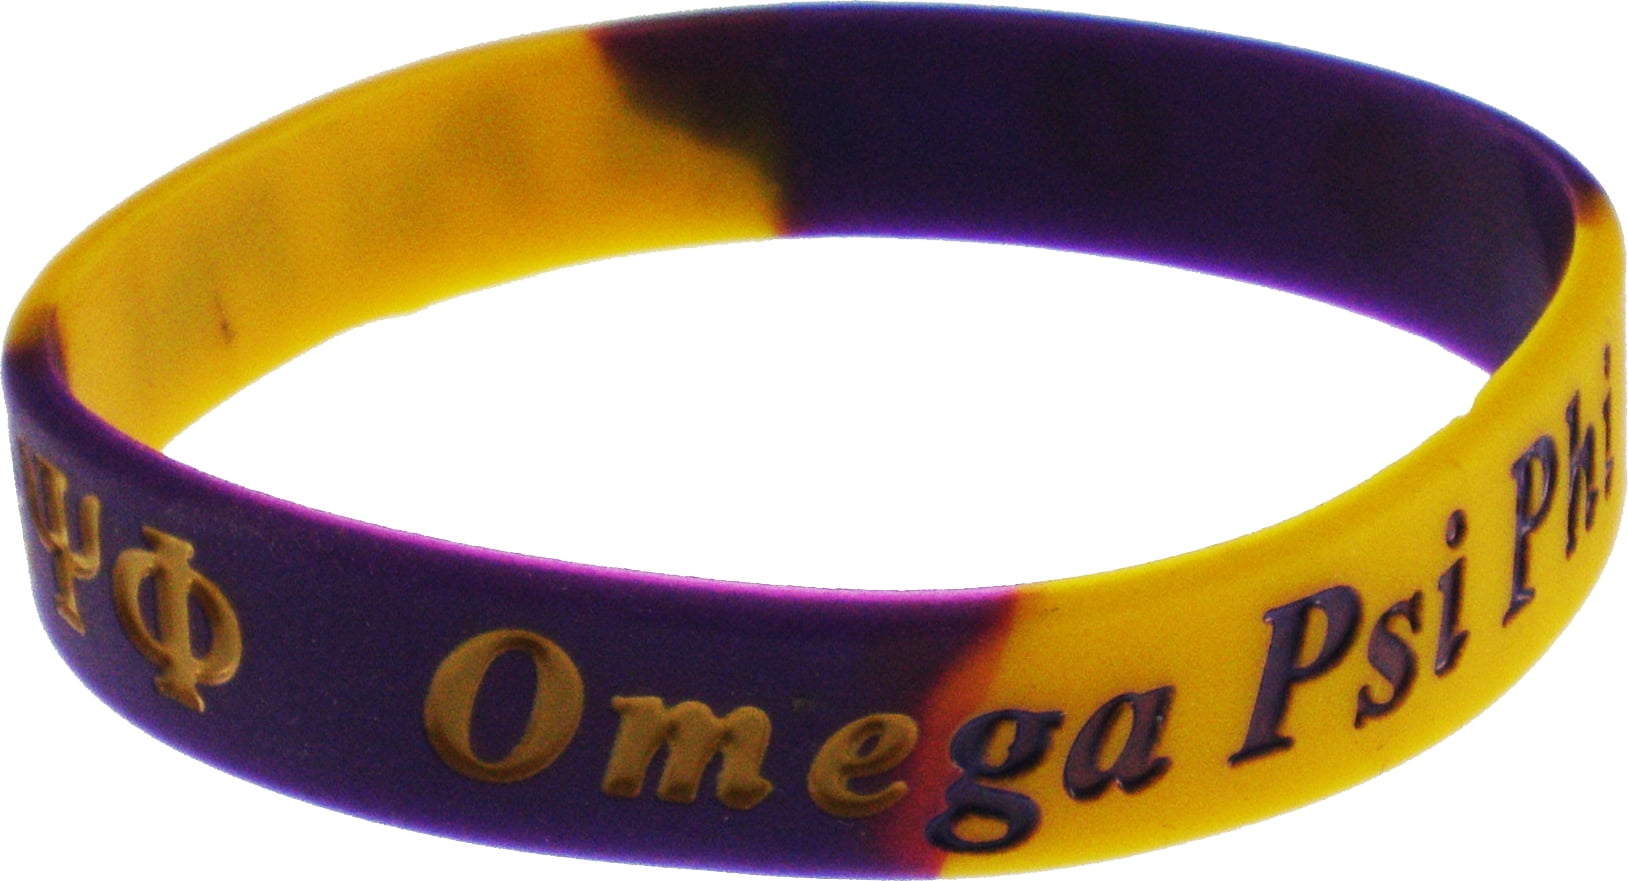 Sigma Gamma Rho Color Swirl Silicone Bracelet 93908 Pack of 2 - Blue/Gold - 8inch 